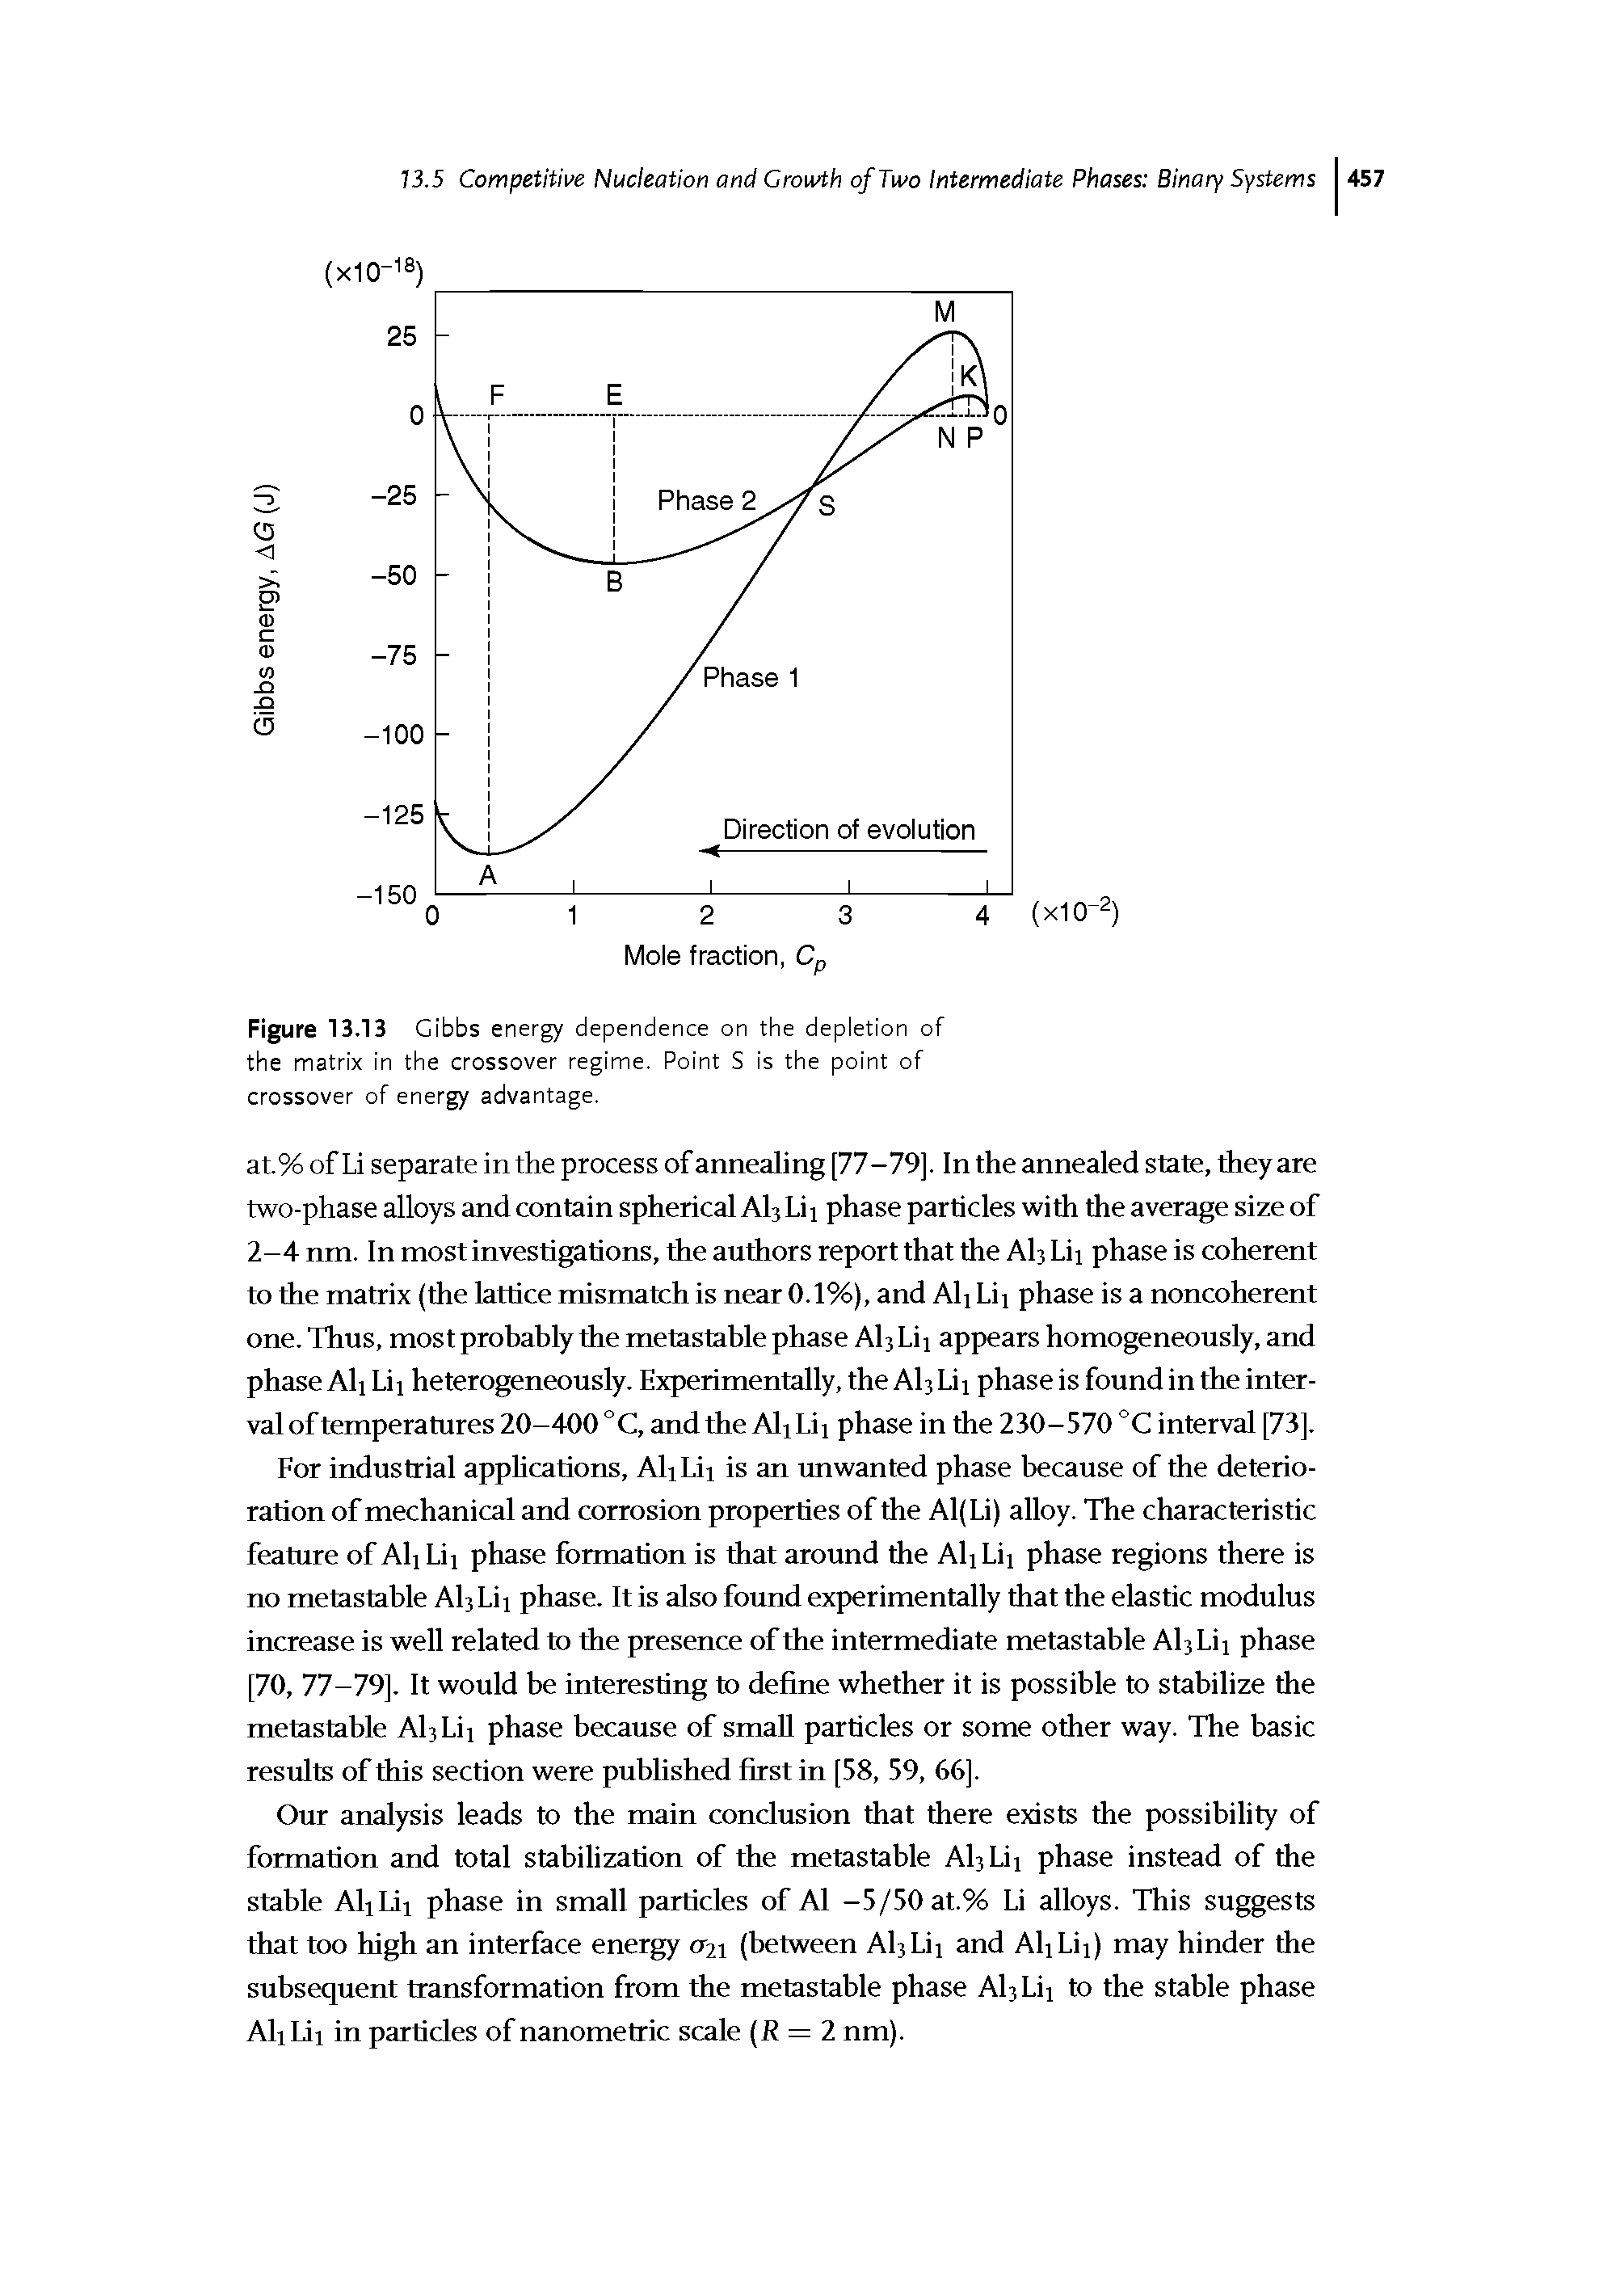 Figure 13.13 Gibbs energy dependence on the depletion of the matrix in the crossover regime. Point S is the point of crossover of energy advantage.